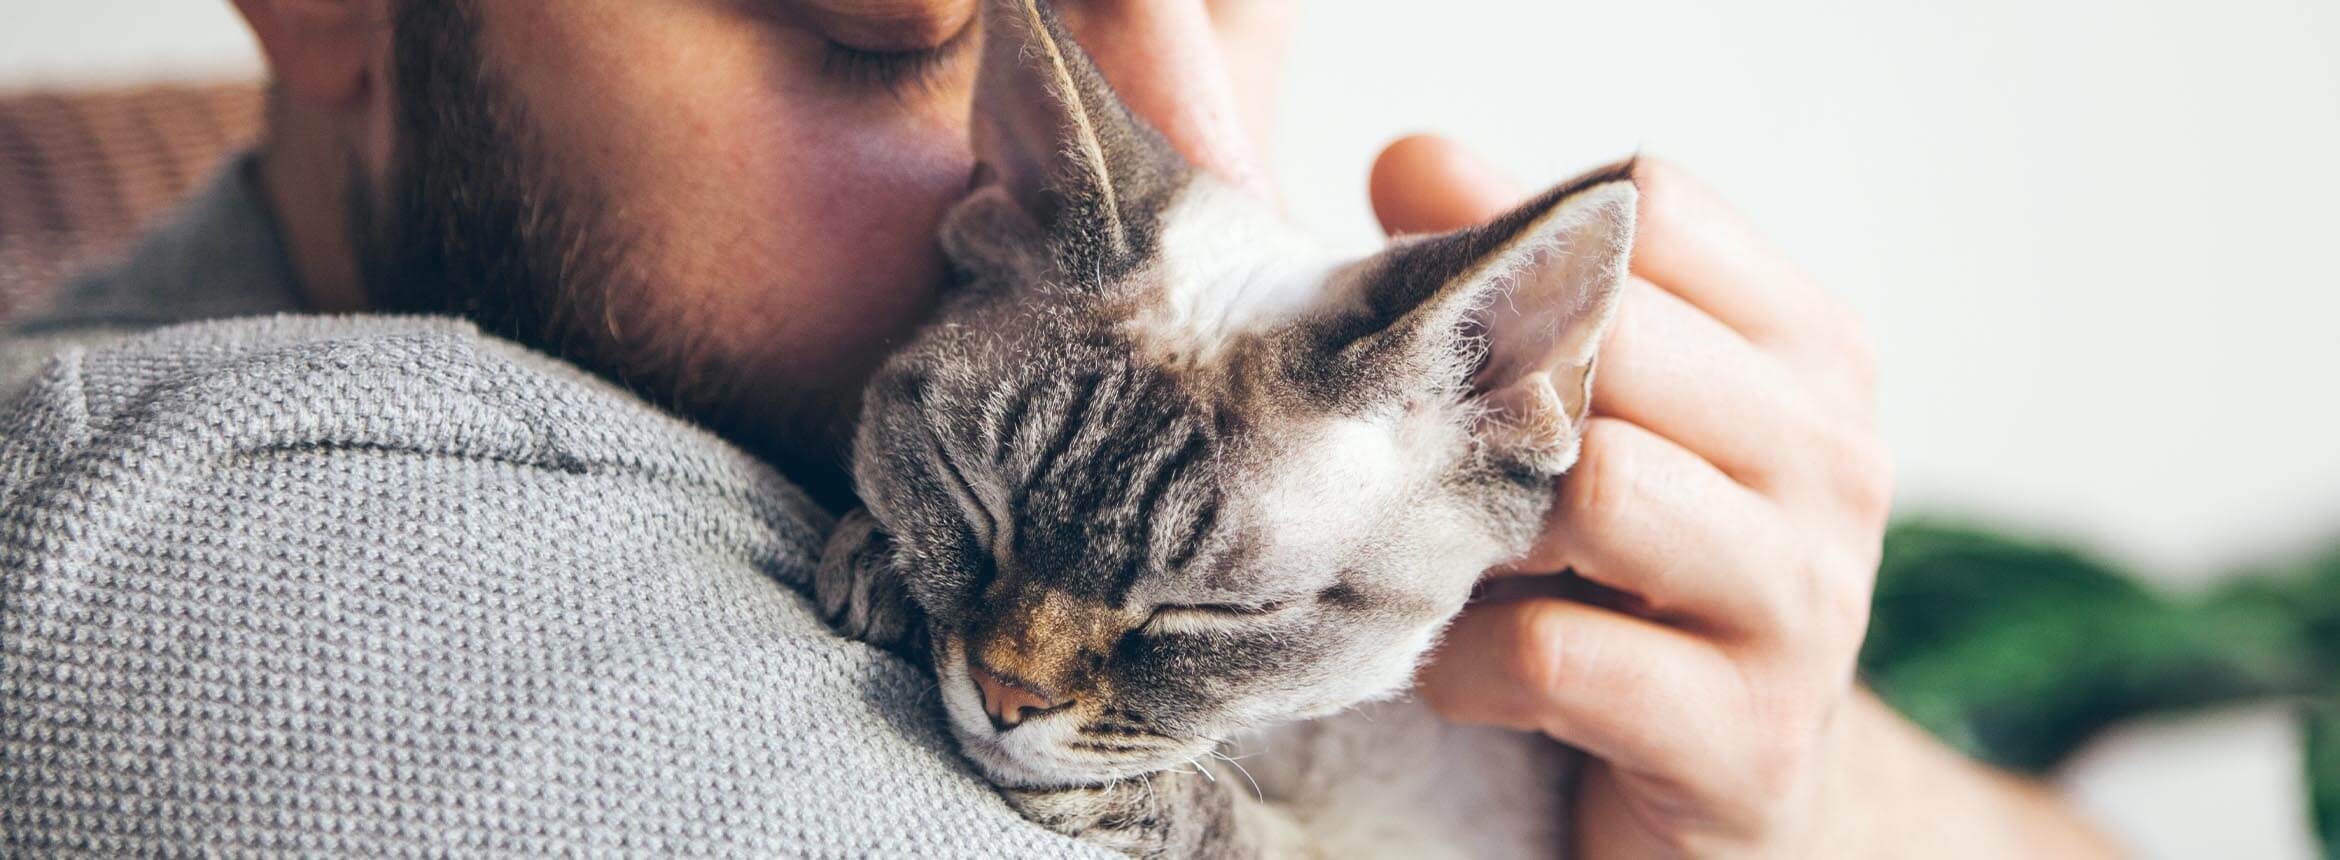 Image of a cat purring